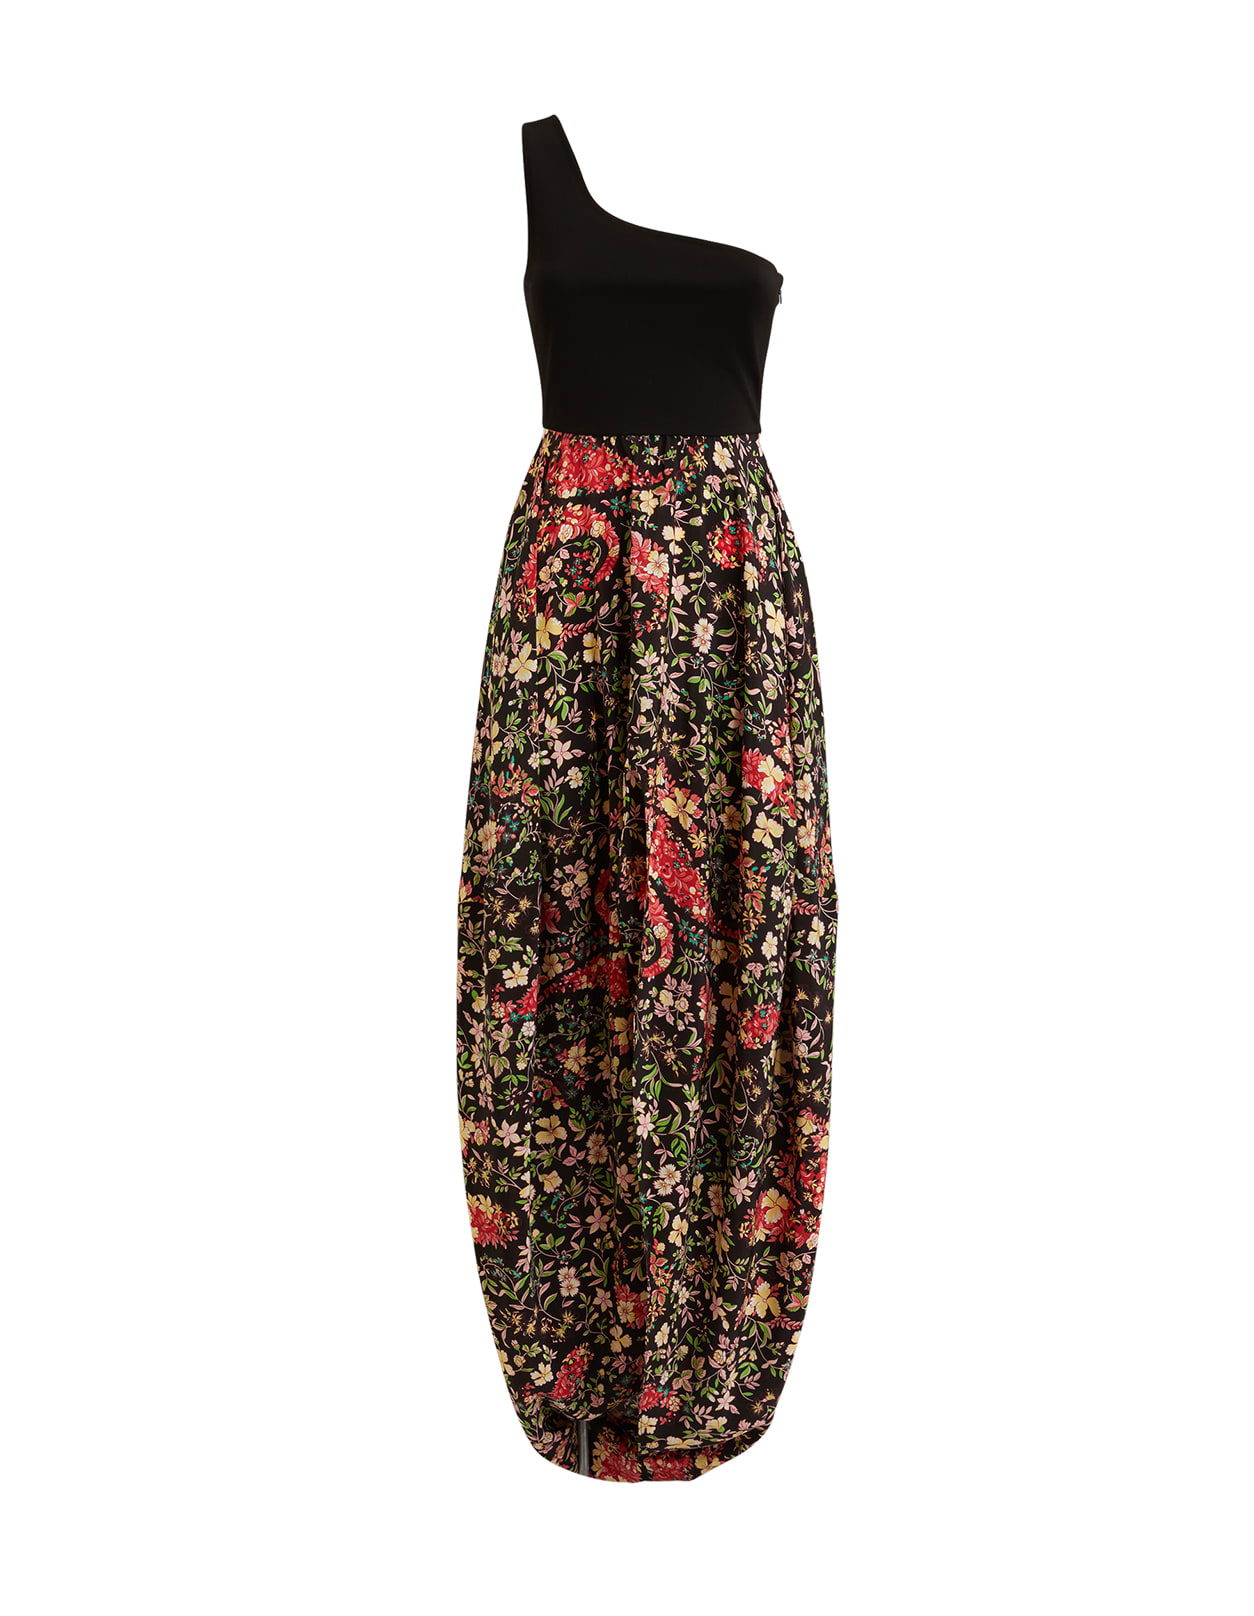 Etro Black One Shoulder Dress With Floral Paisley Print